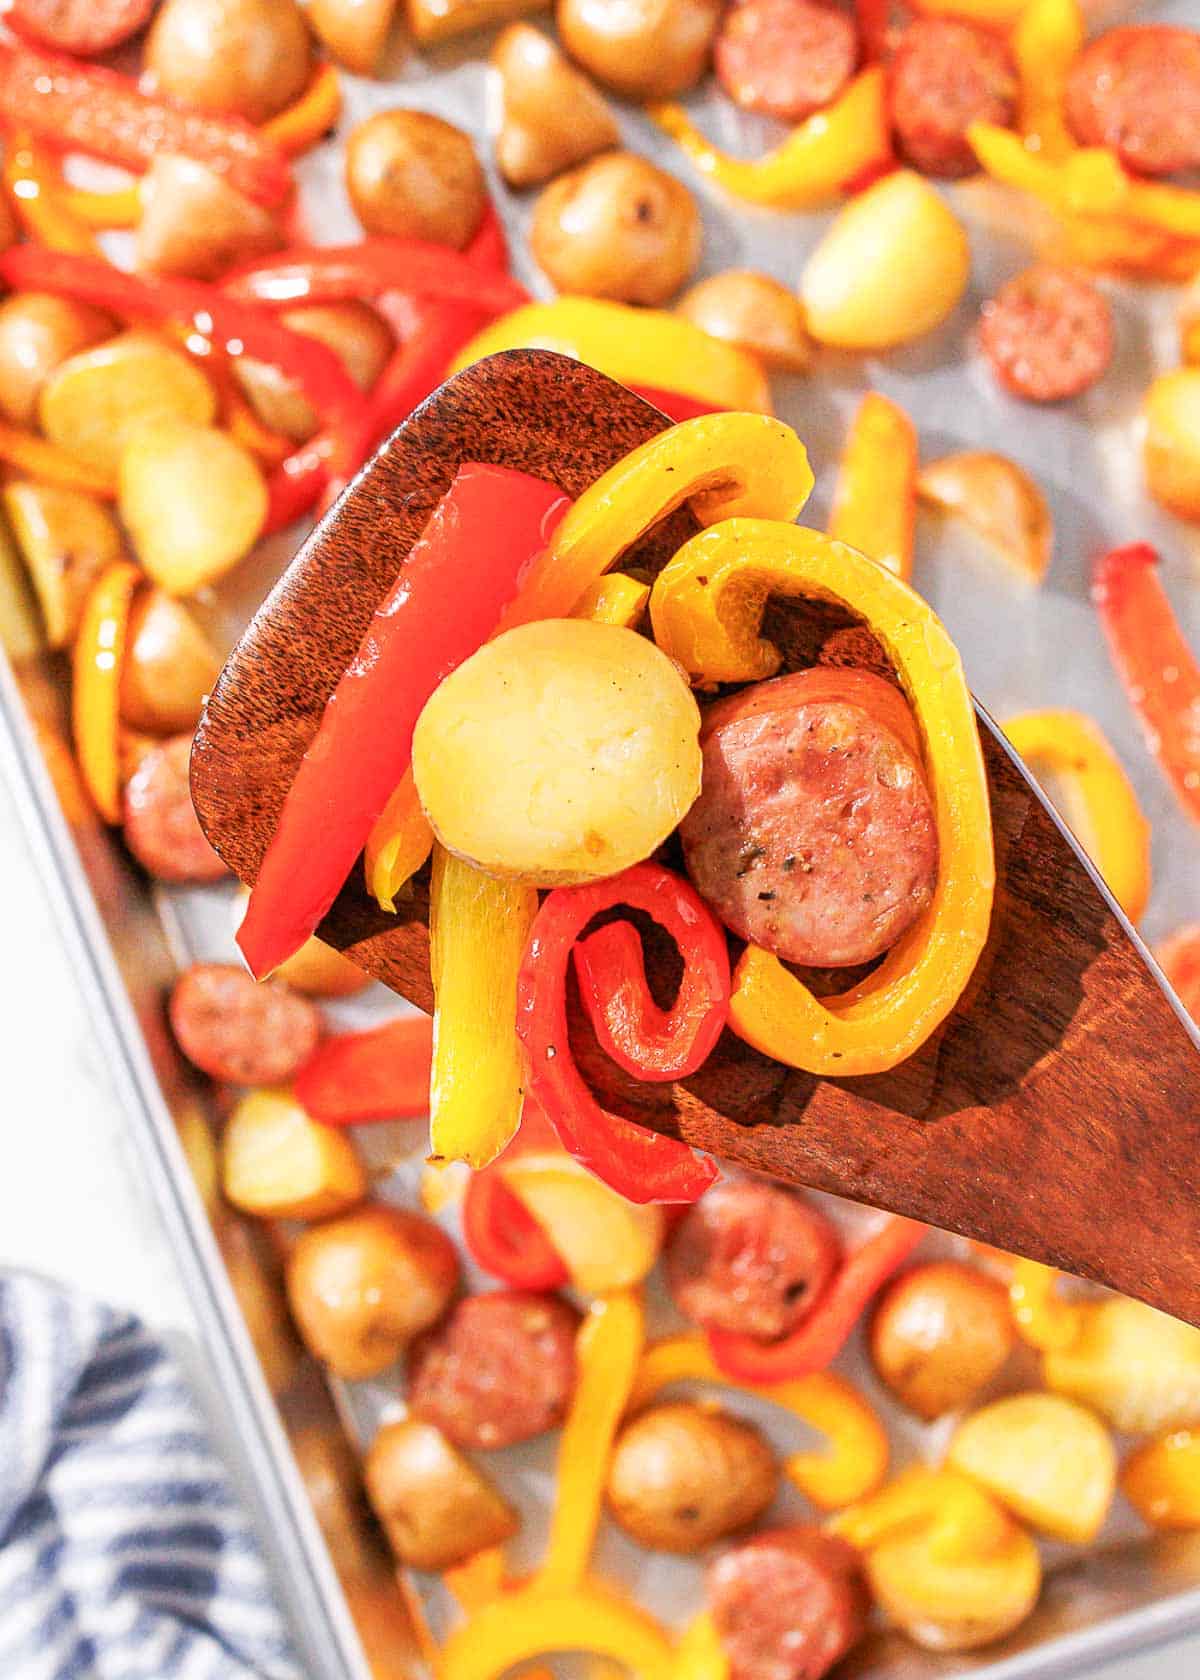 A spoon holds a bite of chicken sausage, peppers, and potatoes above a sheet pan with potatoes, chicken sausage and peppers on it.